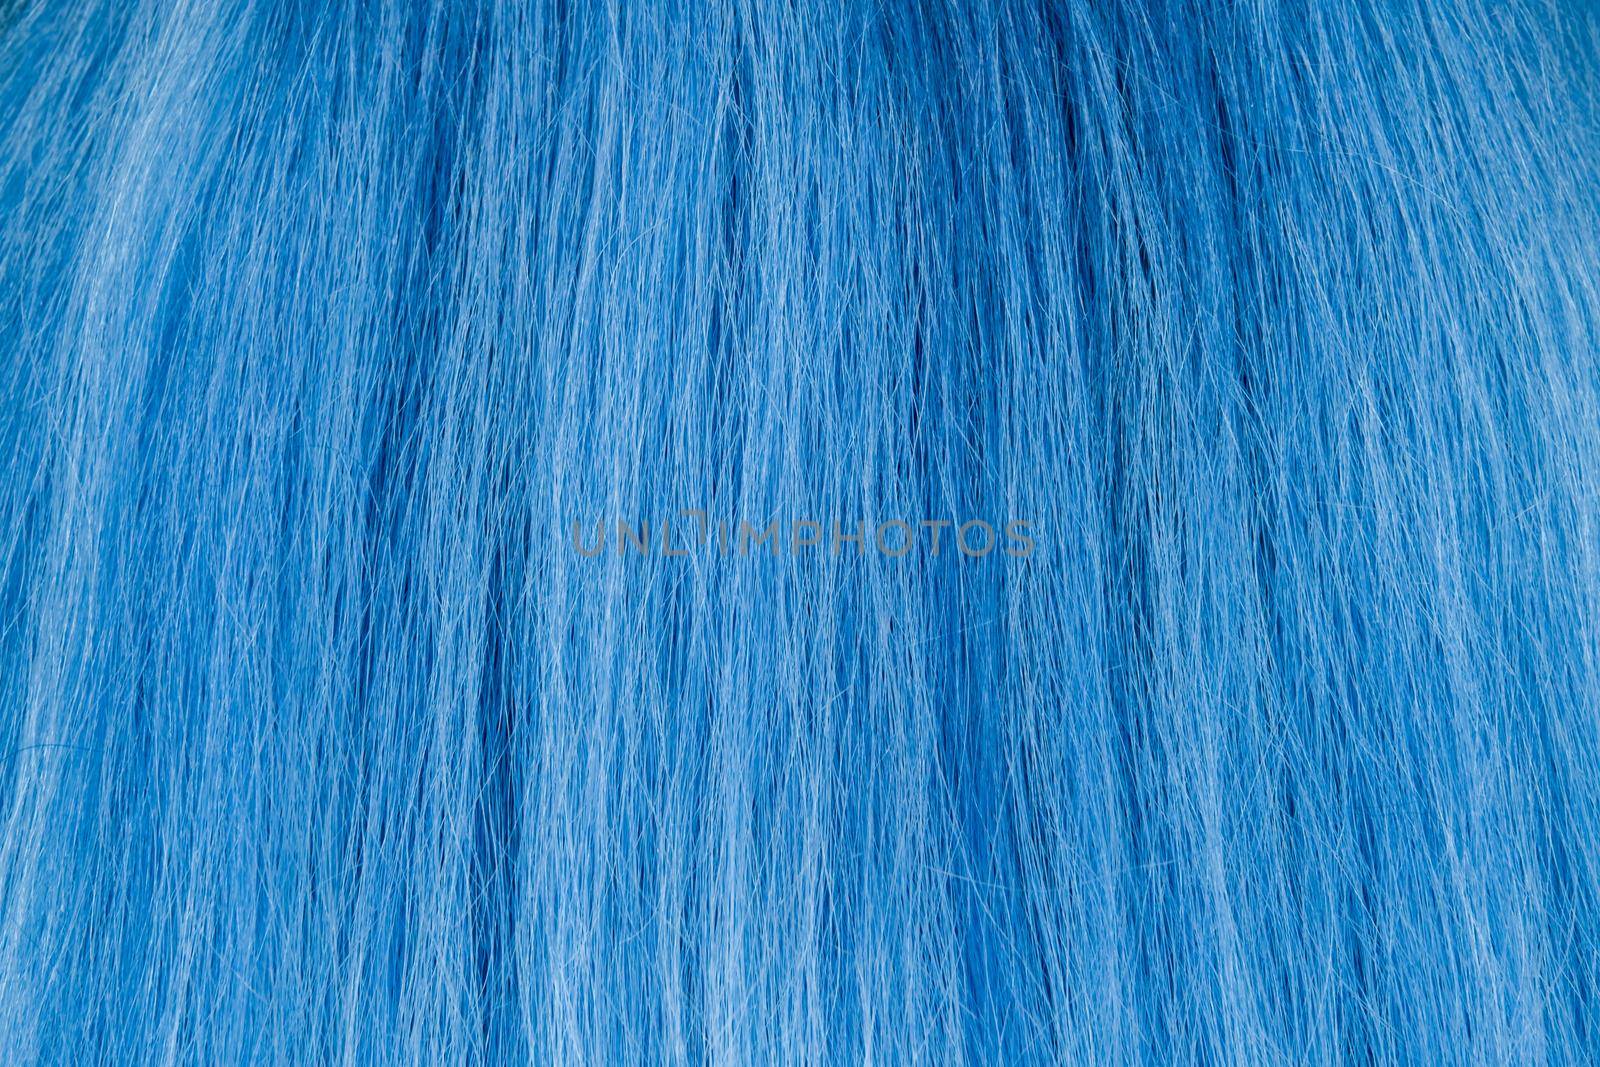 Blue Hair Texture, close view by Roberto